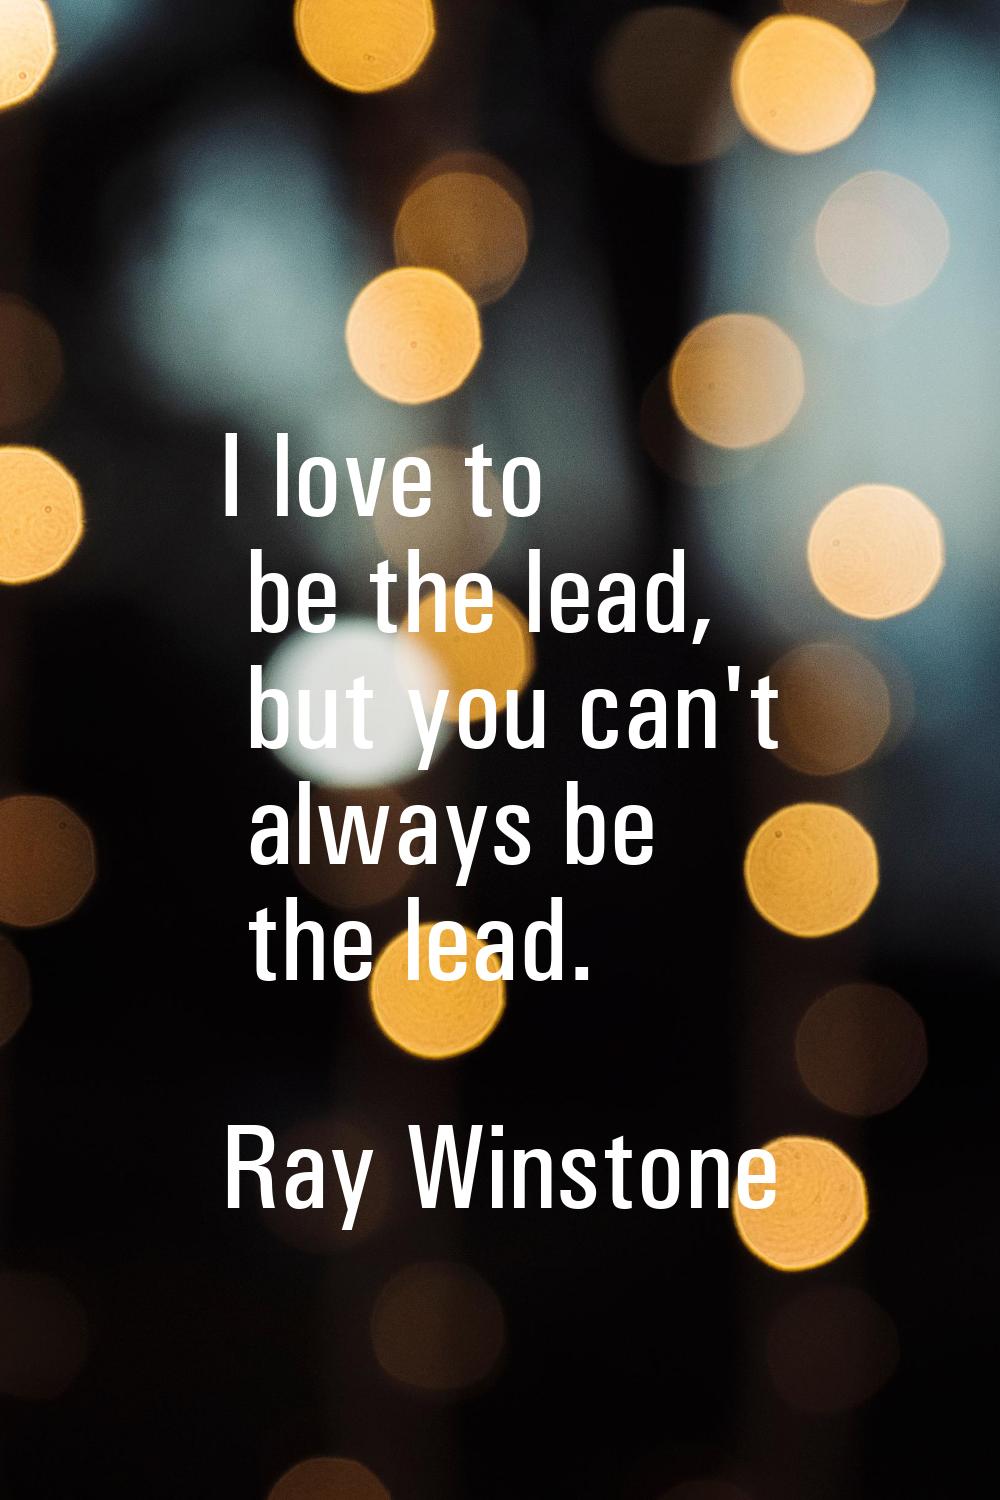 I love to be the lead, but you can't always be the lead.